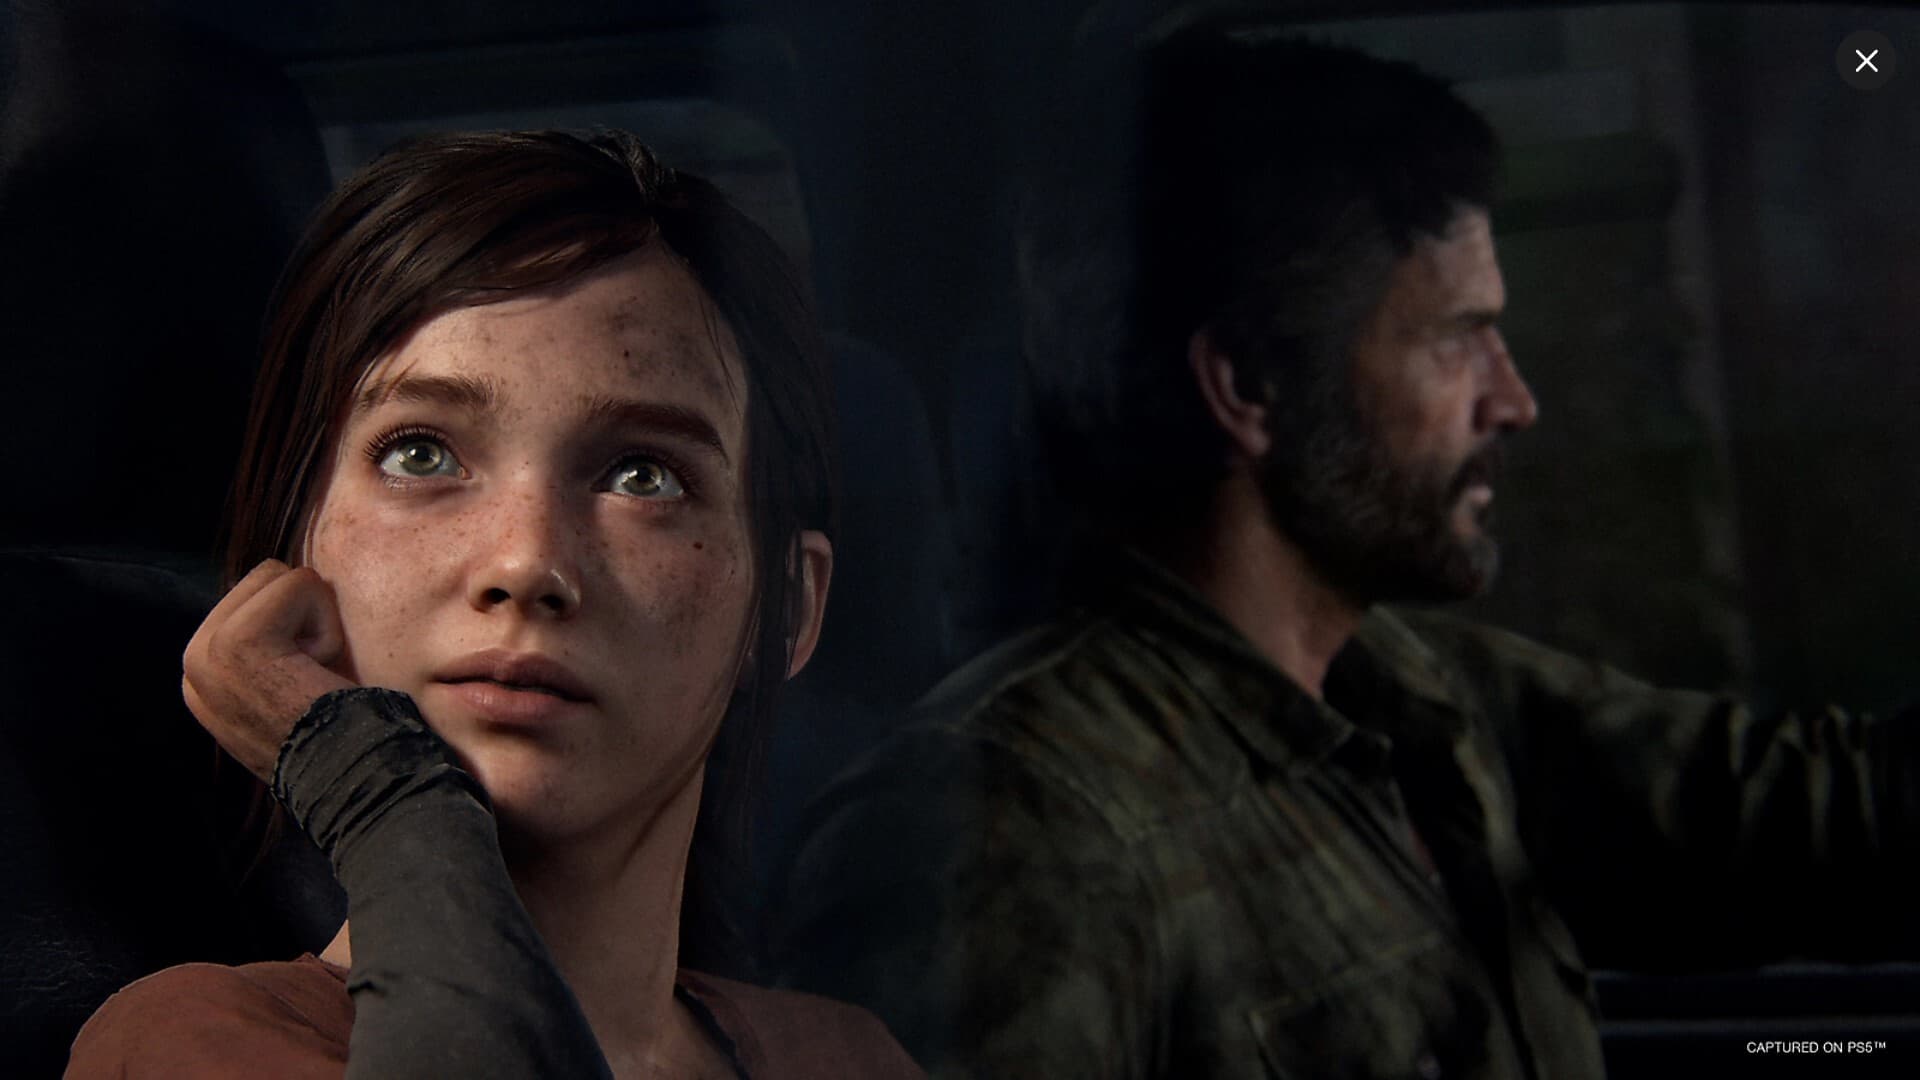 The Last of Us Part 2's creators said Ellie is the only playable character  - Polygon